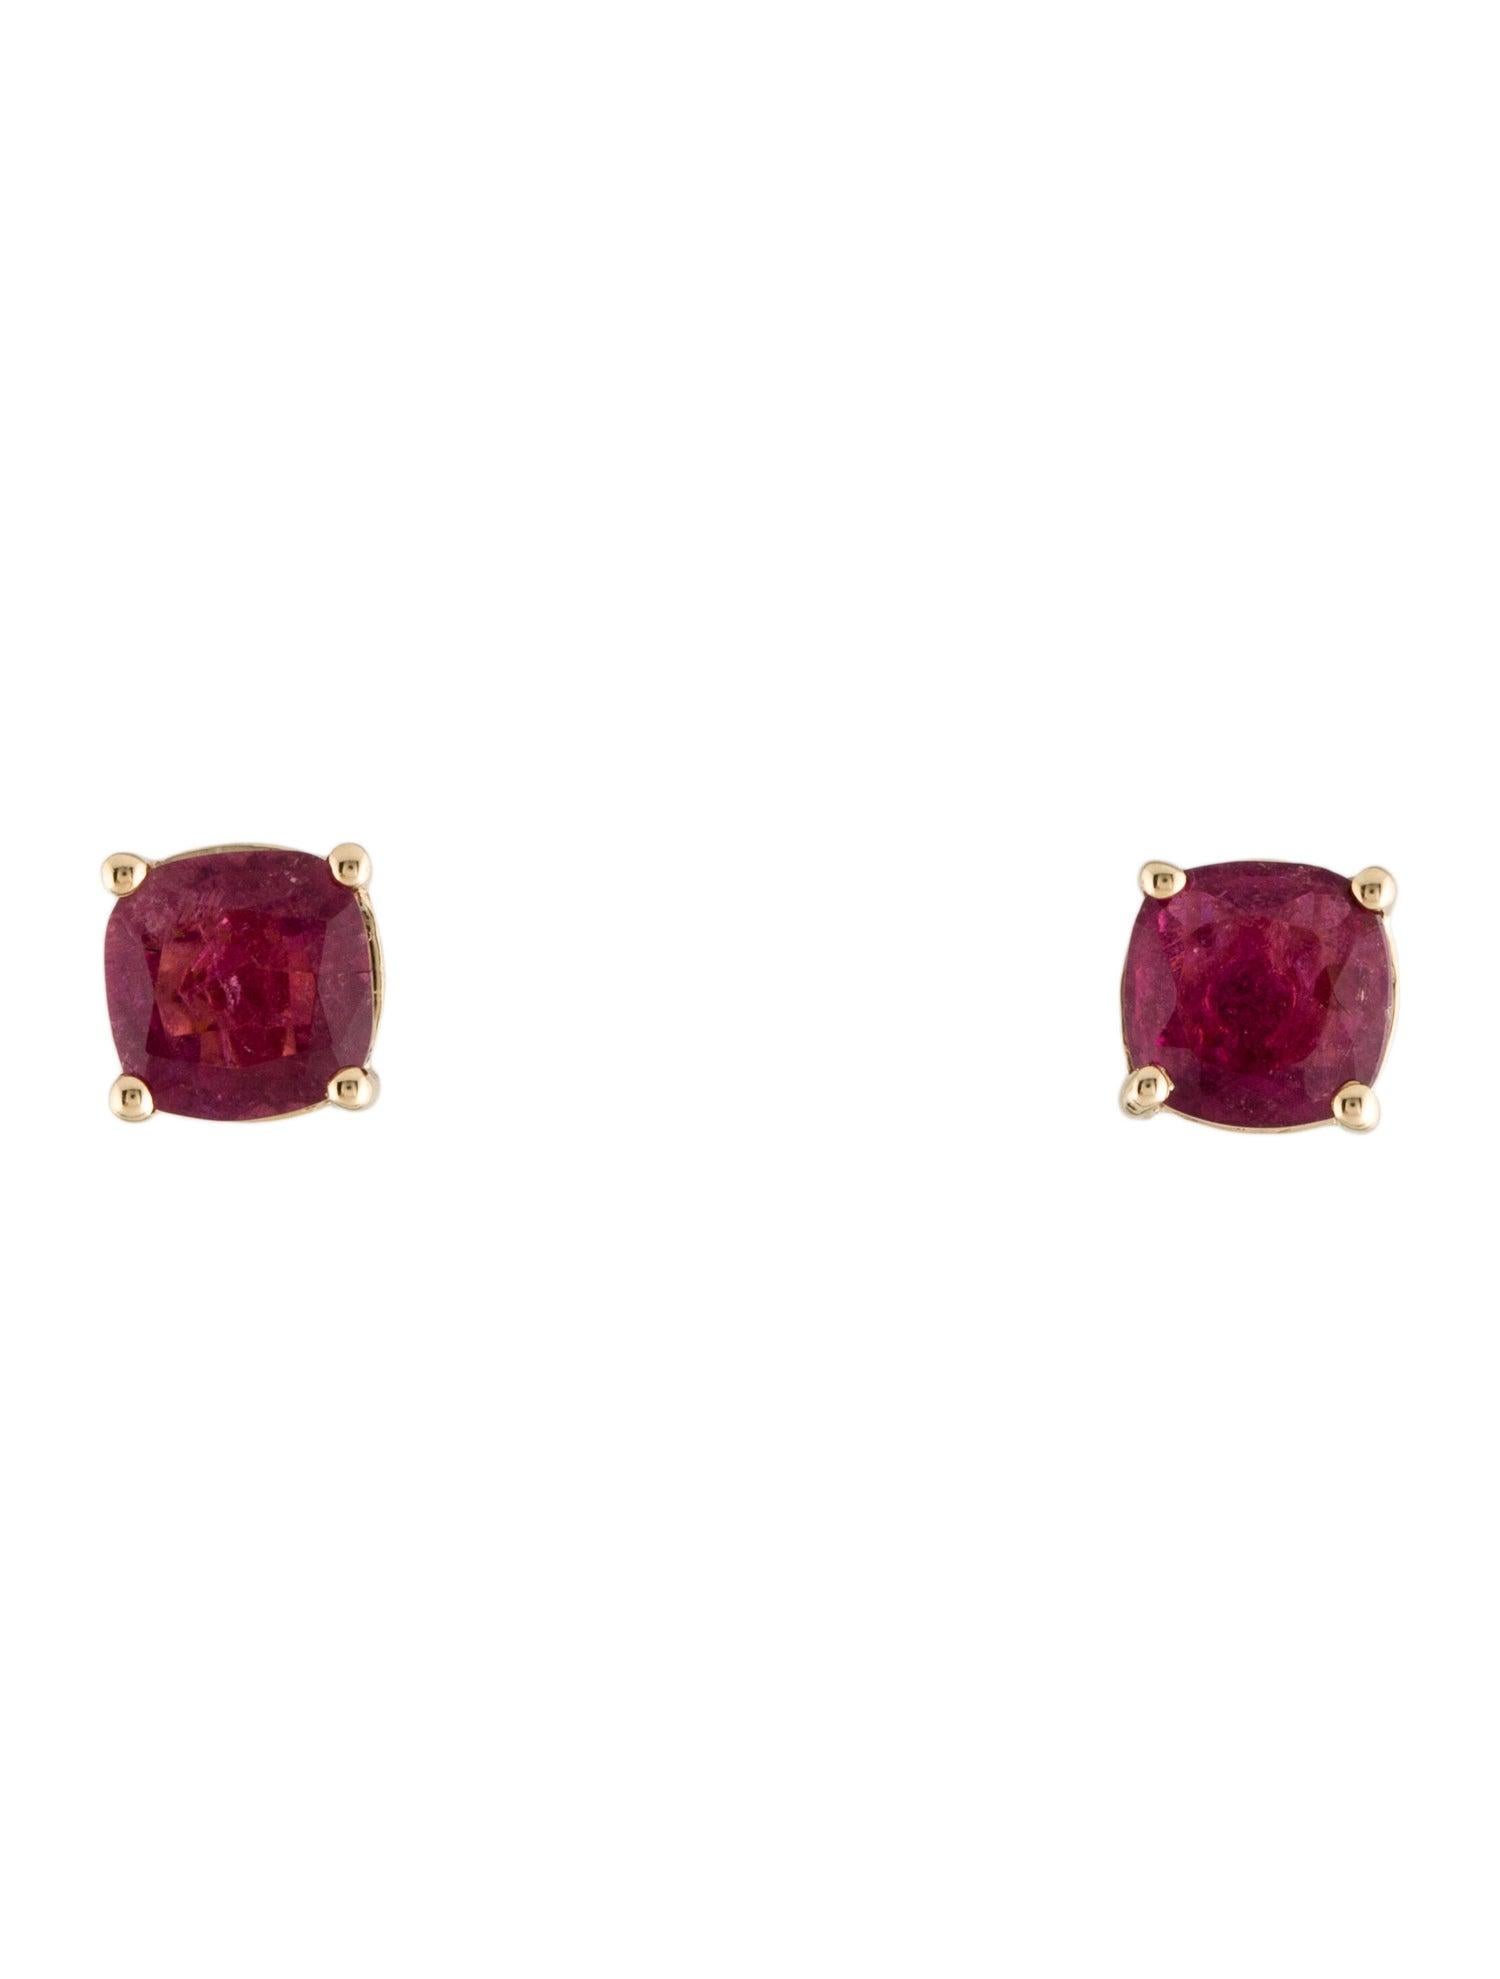 Exquisite 14K Tourmaline Stud Earrings - Stunning & Timeless Glamour Jewelry In New Condition For Sale In Holtsville, NY